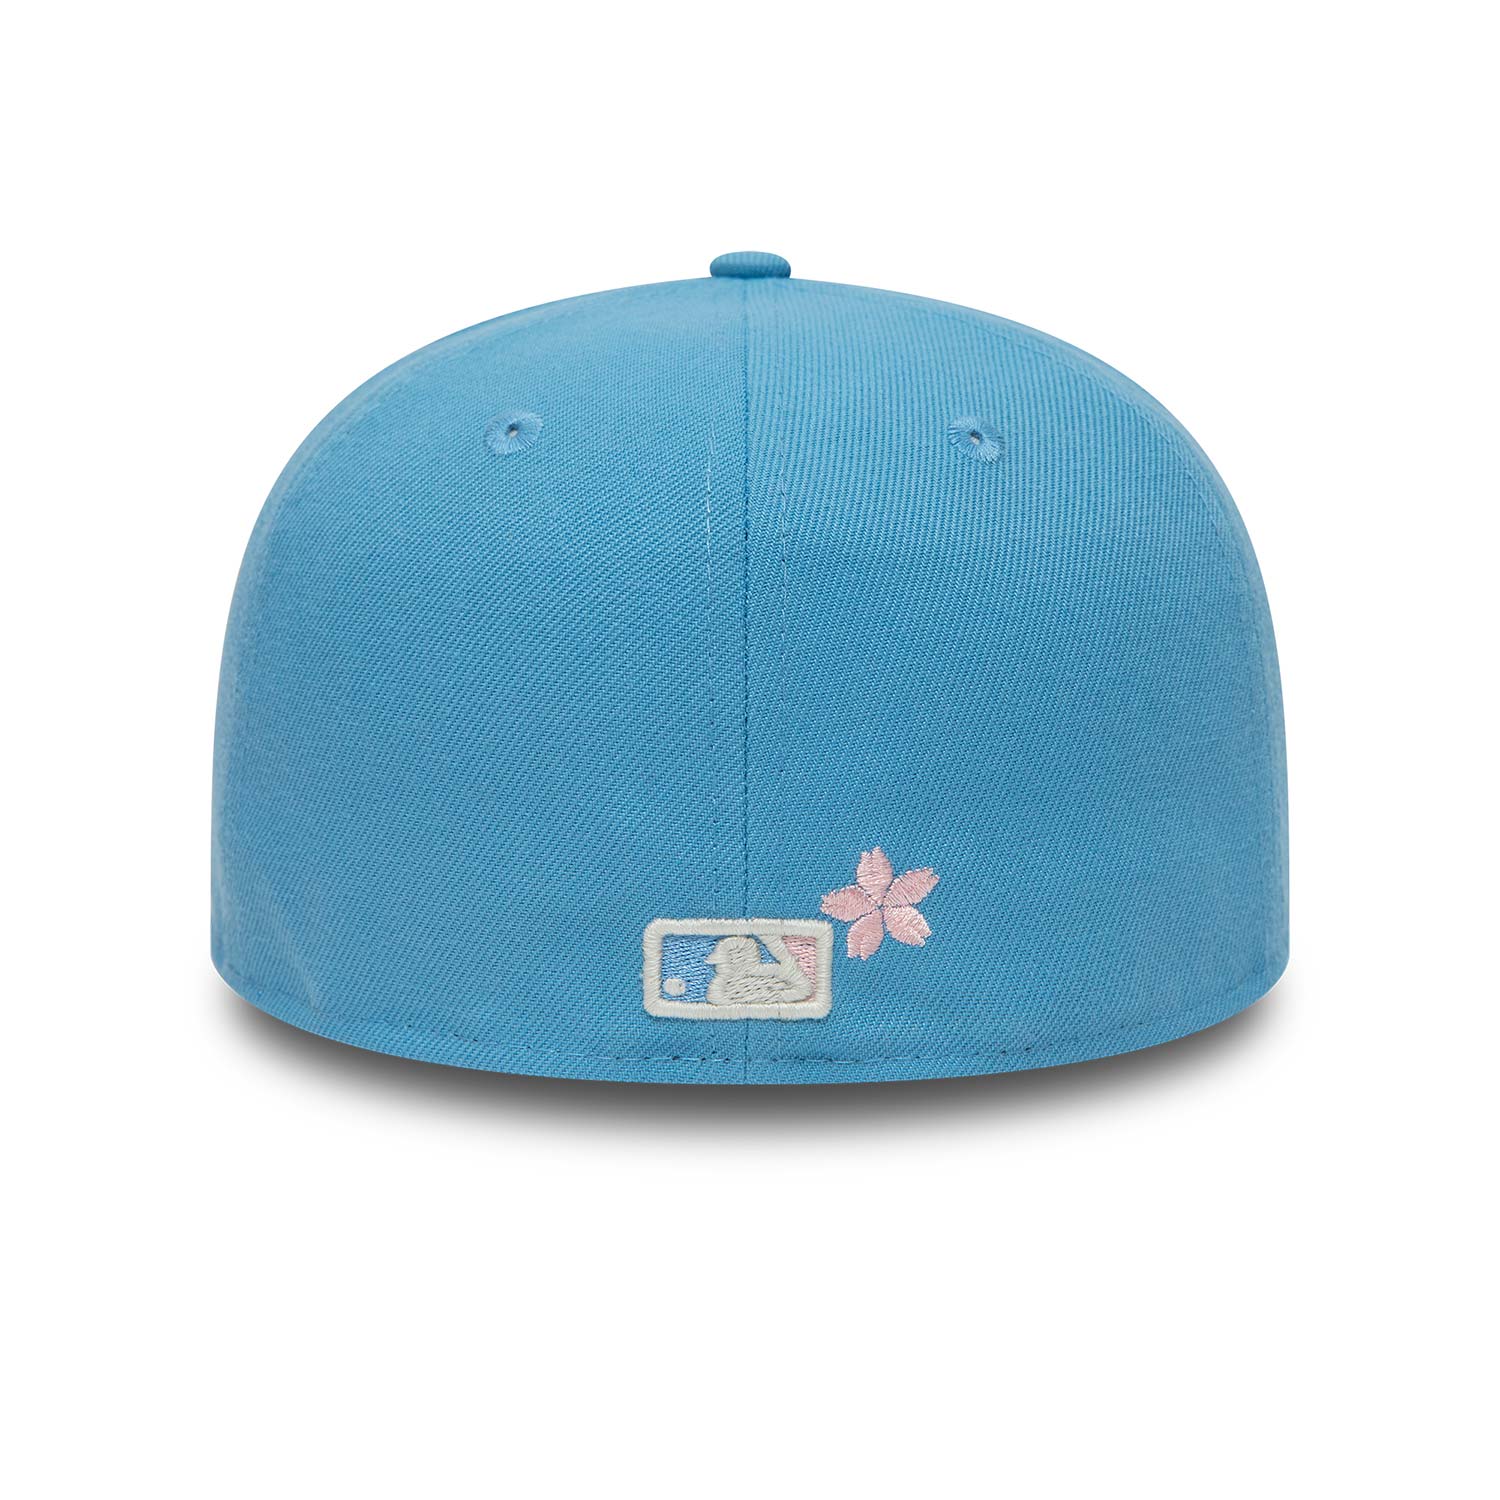 New York Yankees Pink Blossom Blue 59FIFTY Fitted Cap